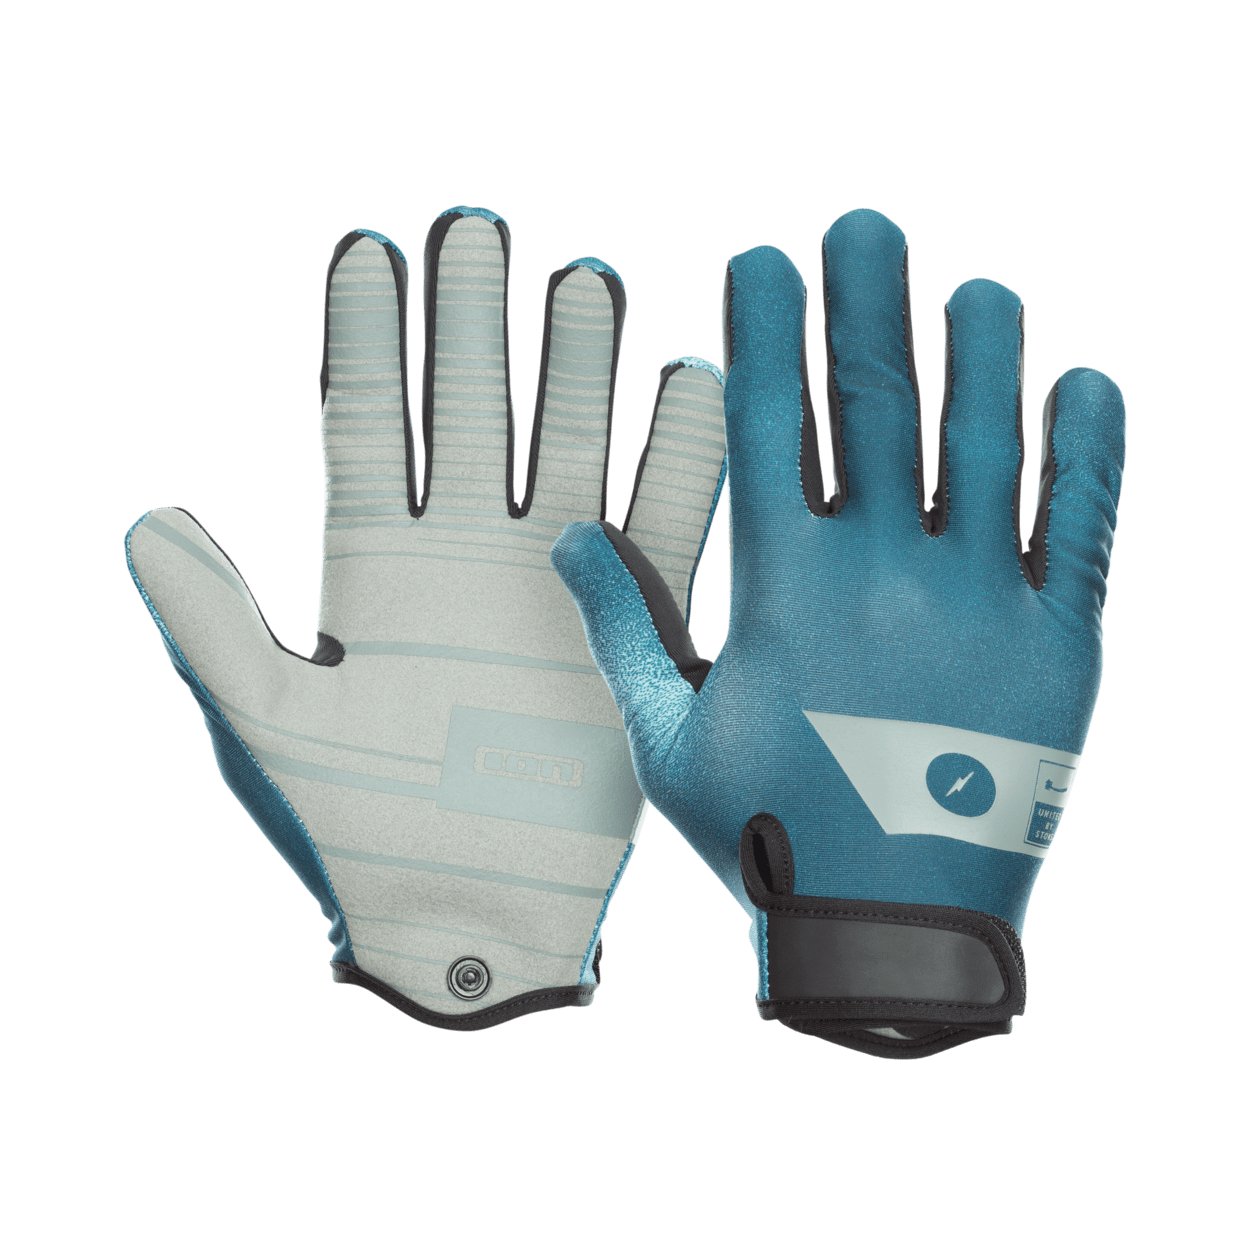 ION Amara Gloves Full Finger 2022 - Worthing Watersports - 9008415883417 - Neo Accessories - ION Water